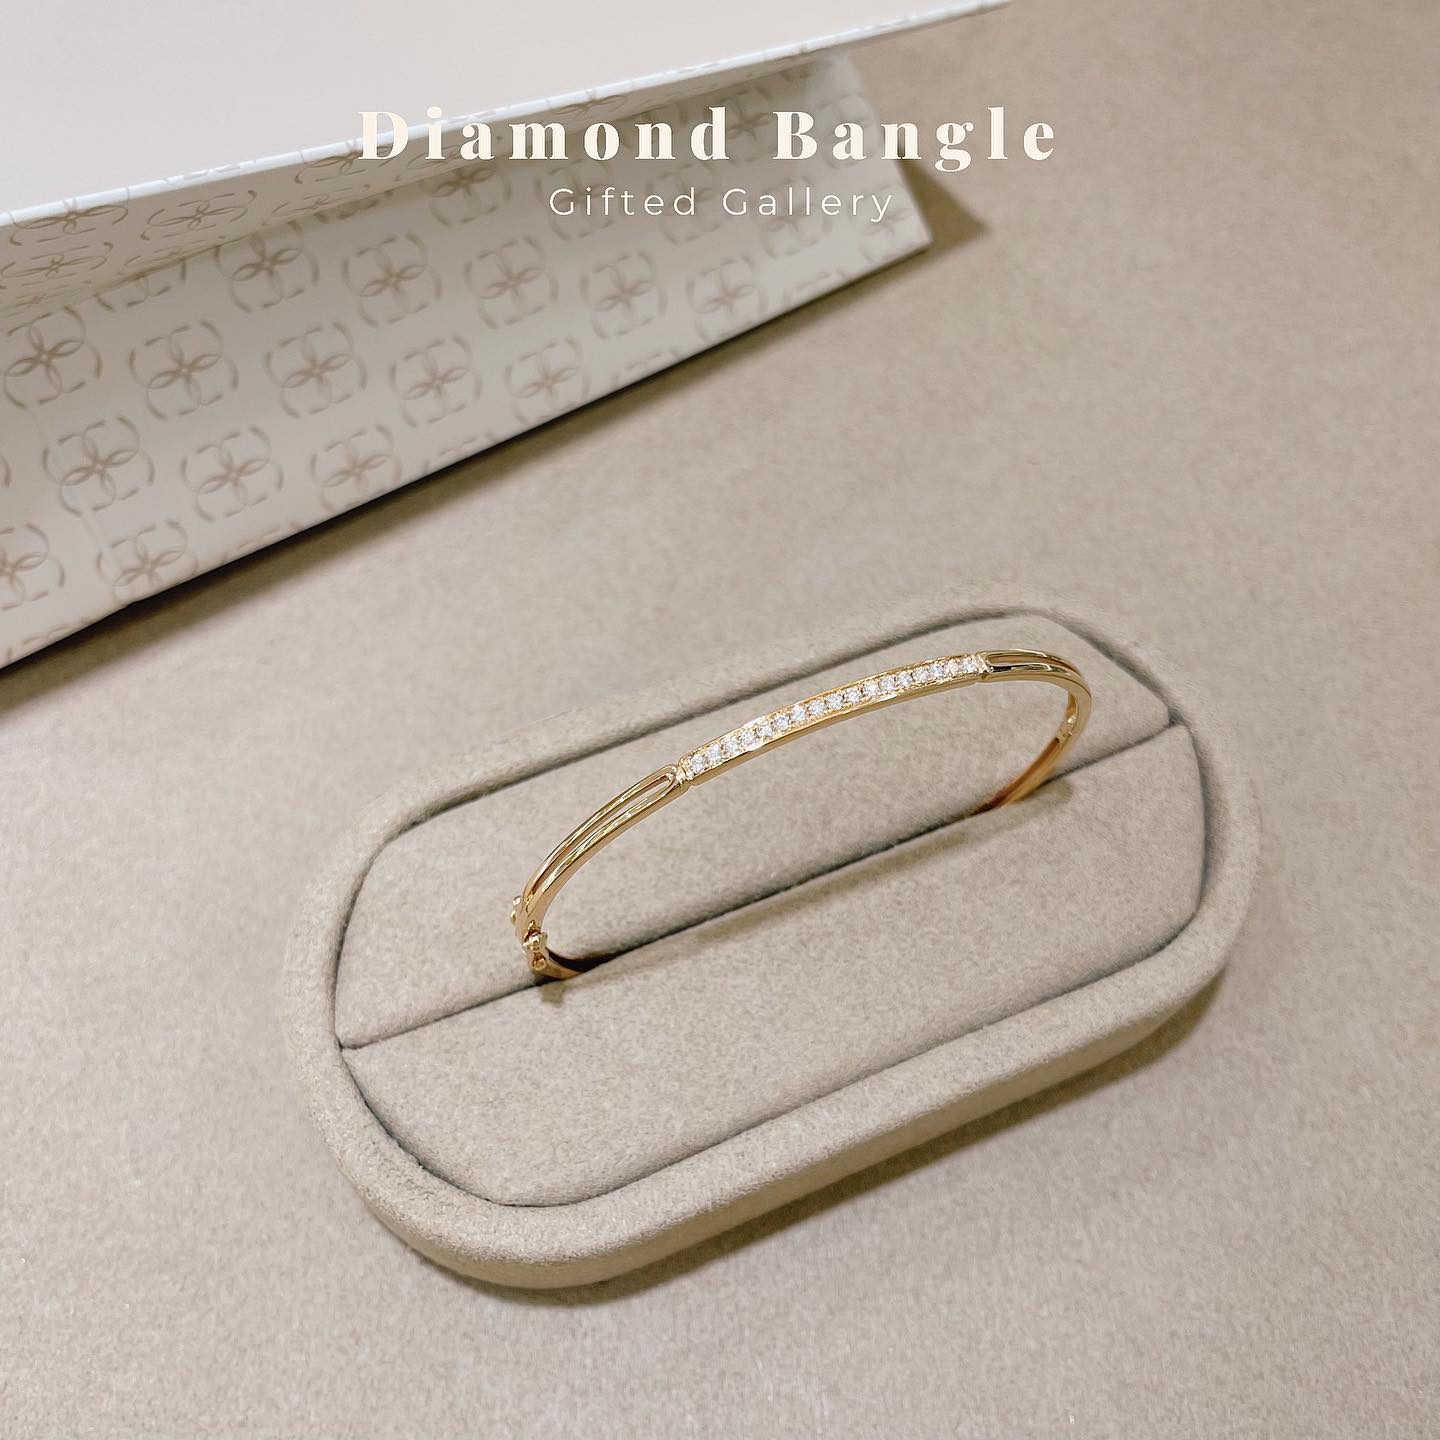 Diamond Bangle by Gifted Gallery